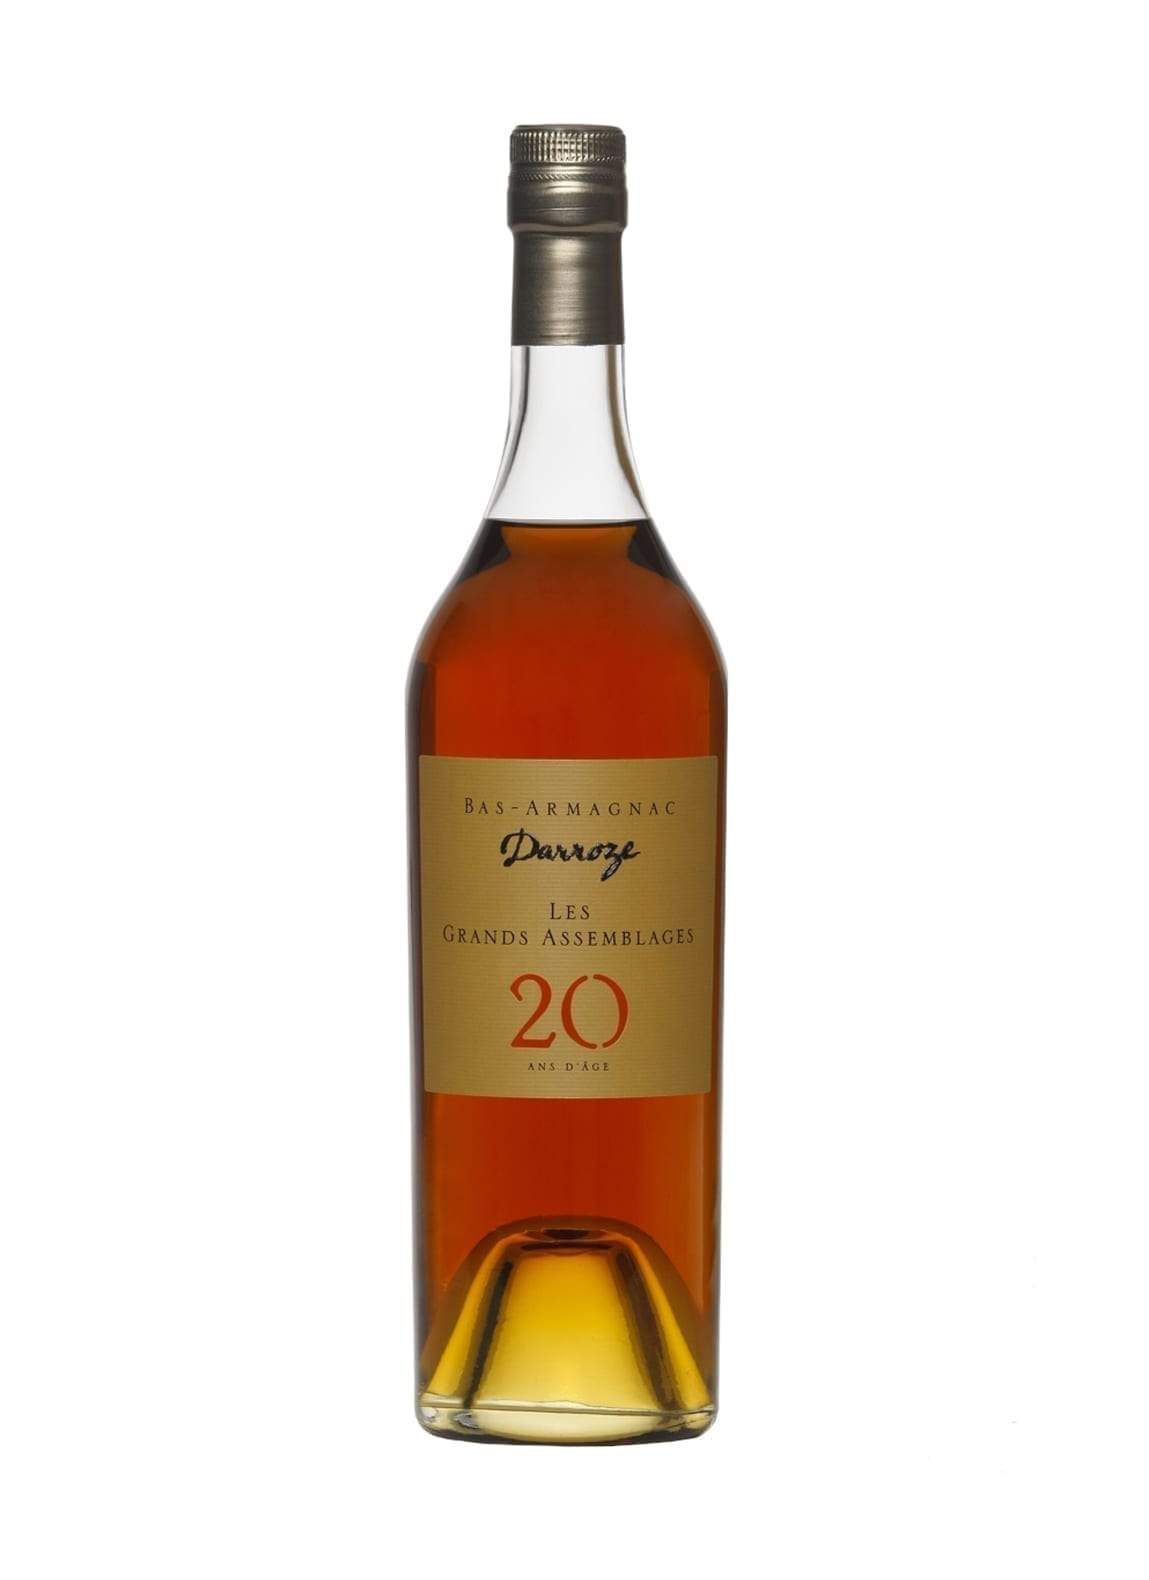 Darroze Grand Bas Armagnac Les Grands Assemblages 20 years 43% 700ml | Brandy | Shop online at Spirits of France